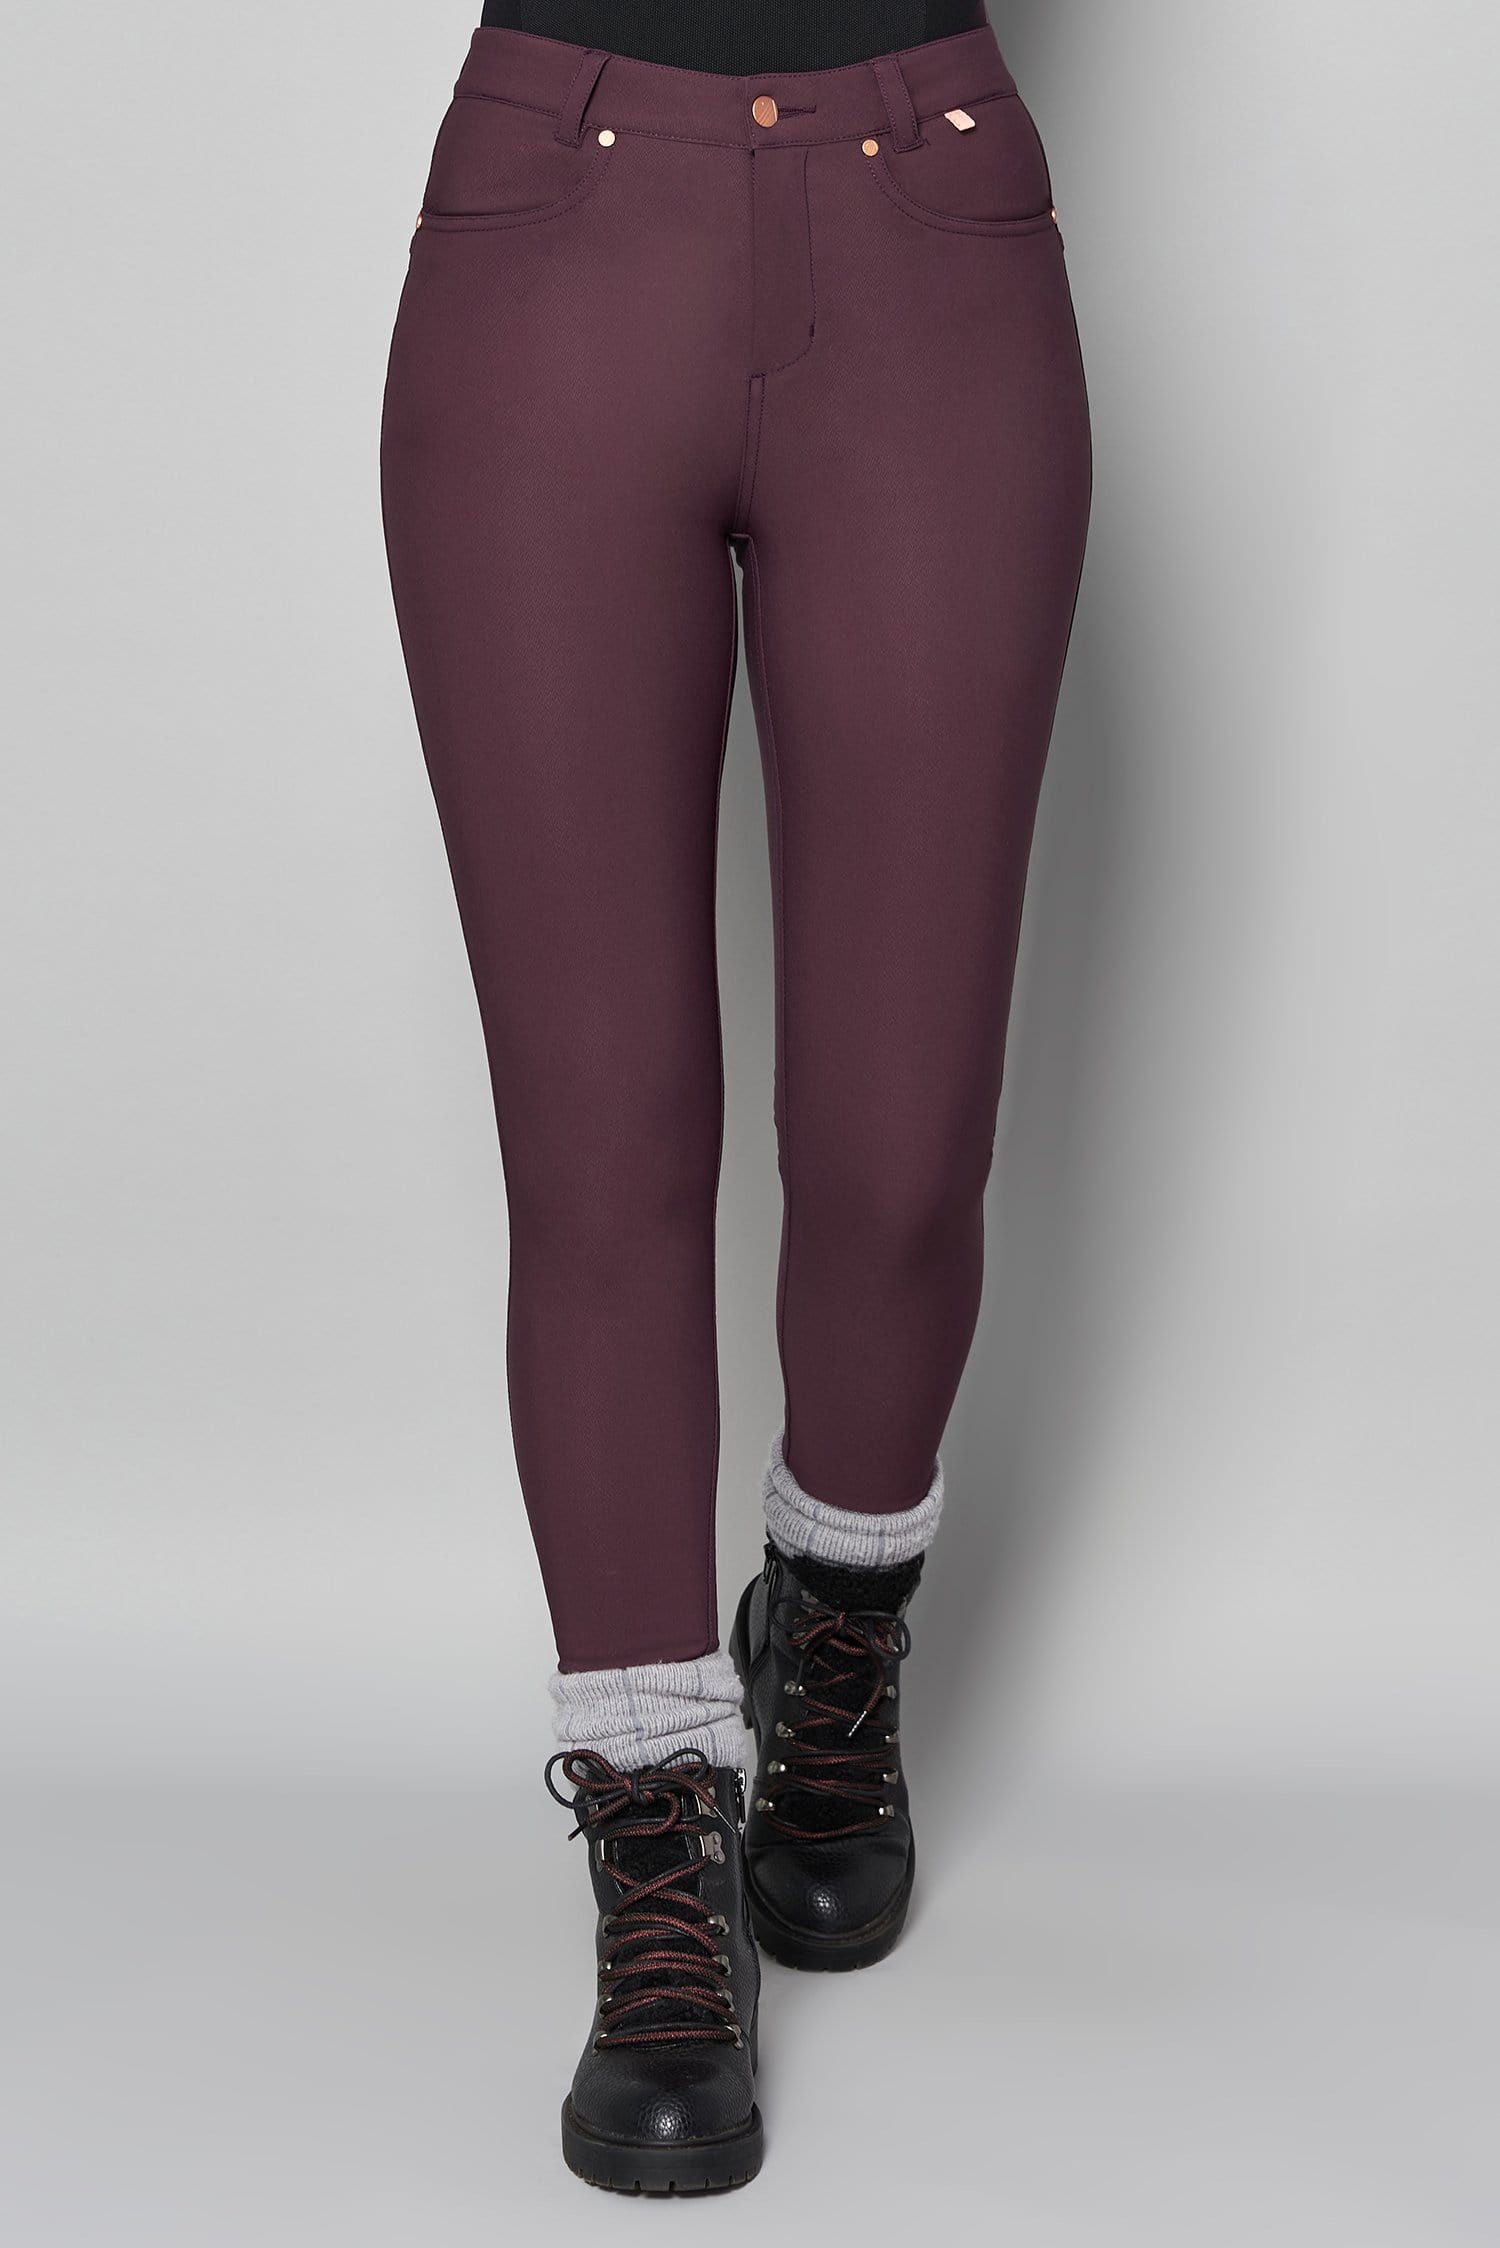 Thermal Skinny Outdoor Trousers - Aubergine - 34l / Uk16 - Womens - Acai Outdoorwear